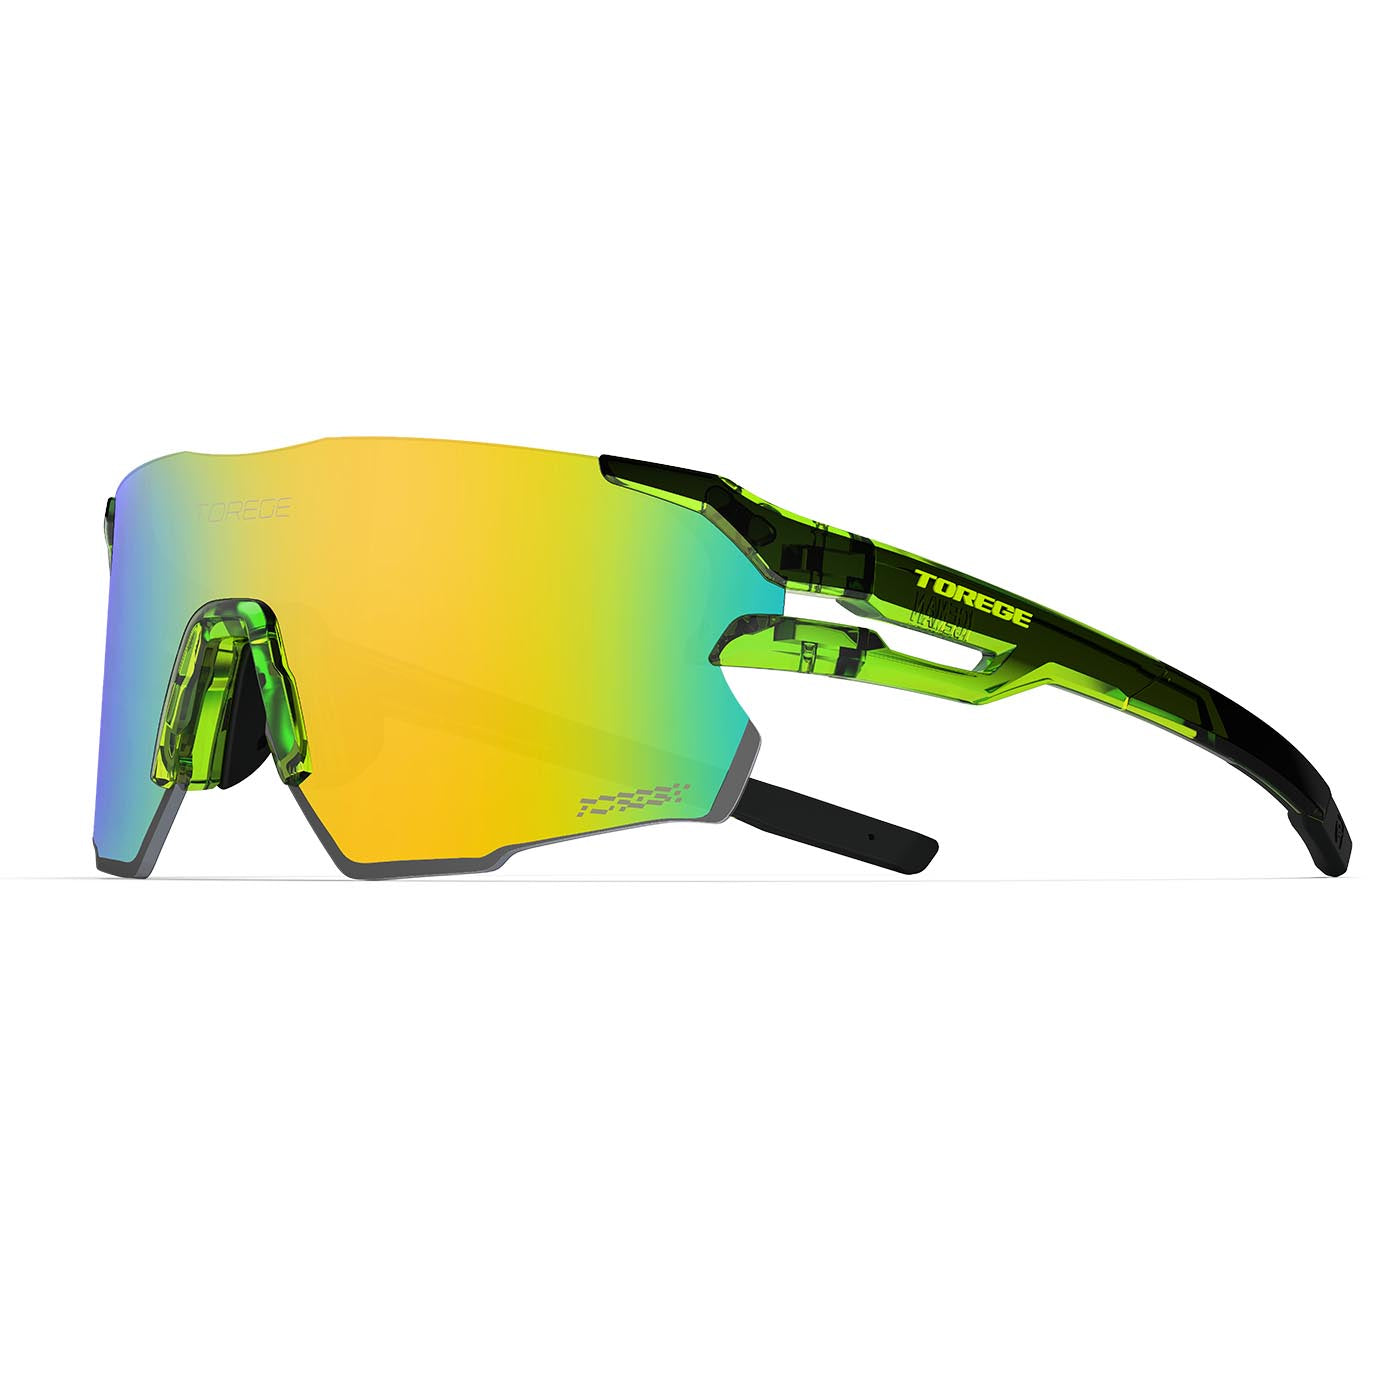 Torege 'Resplenden' Wraparound Sport Sunglasses for Men and Women with Lifetime Warranty - Perfect for Cycling, Hiking, Fishing, Golf, and Running